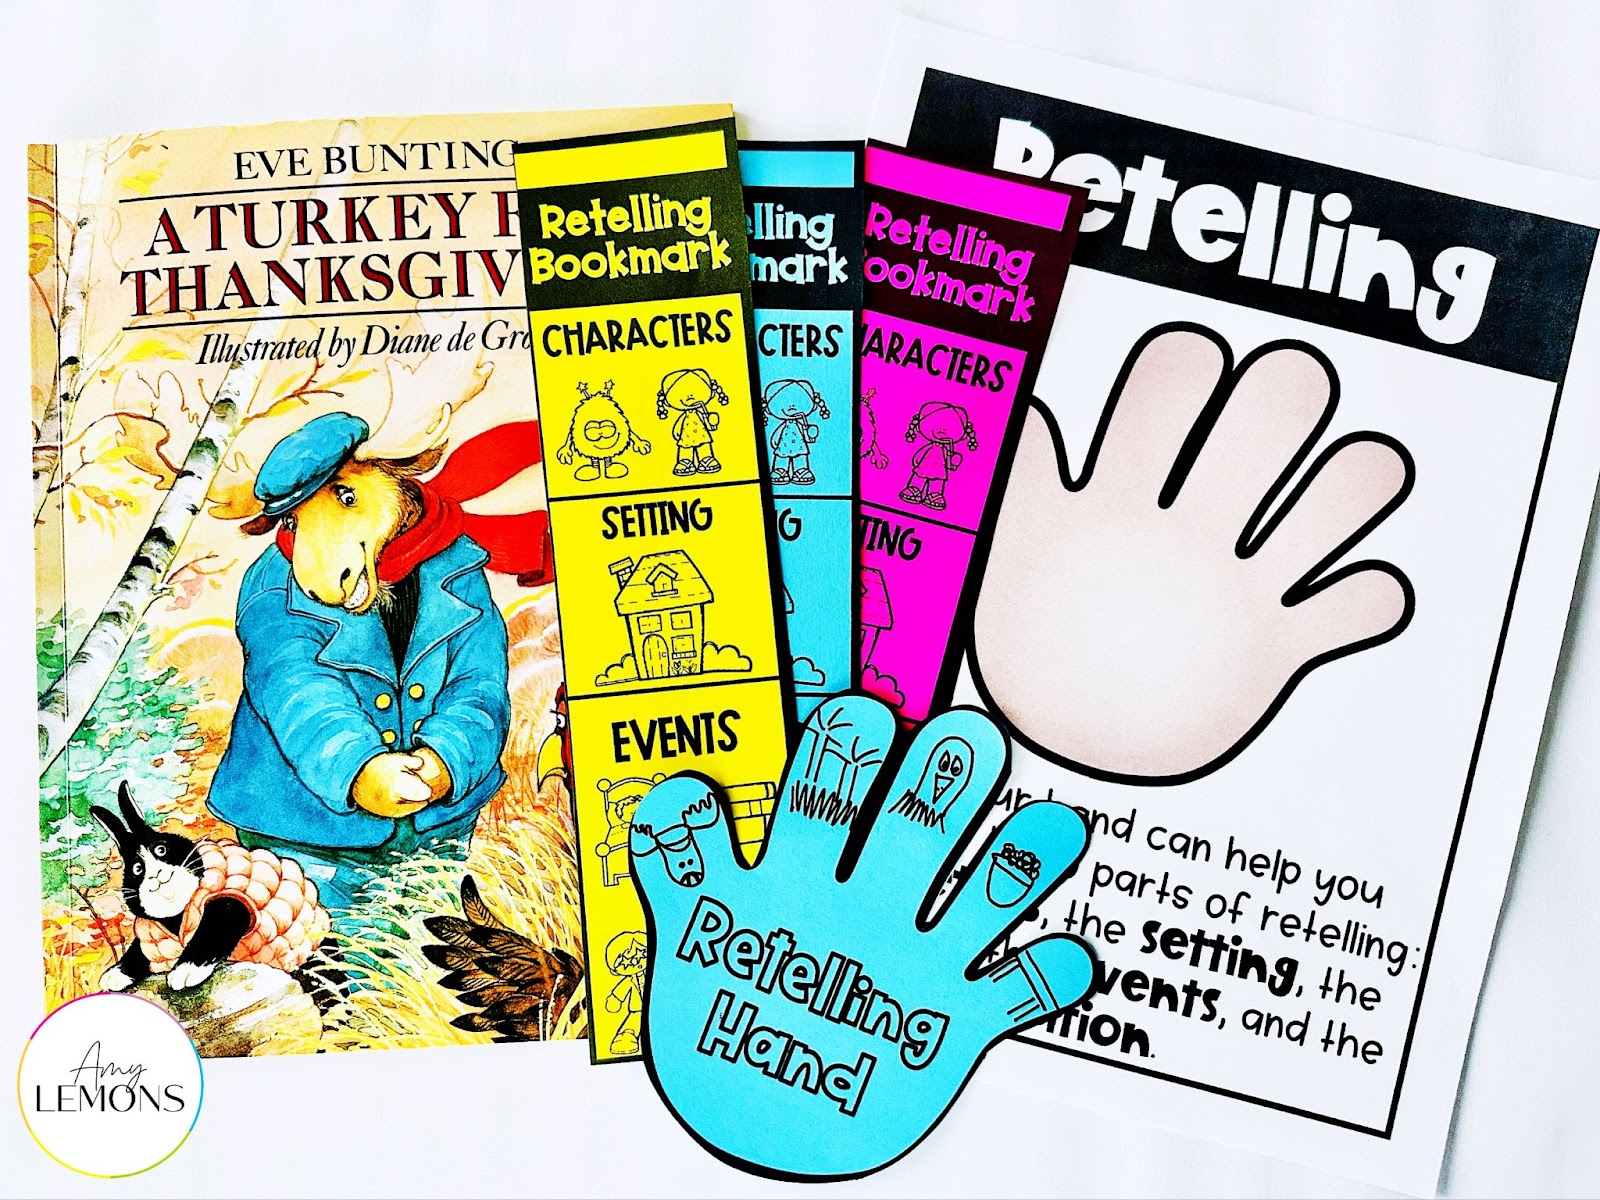 The book A Turkey for Thanksgiving with retelling a story bookmarks, poster, and retelling hand reading comprehension skills activity.